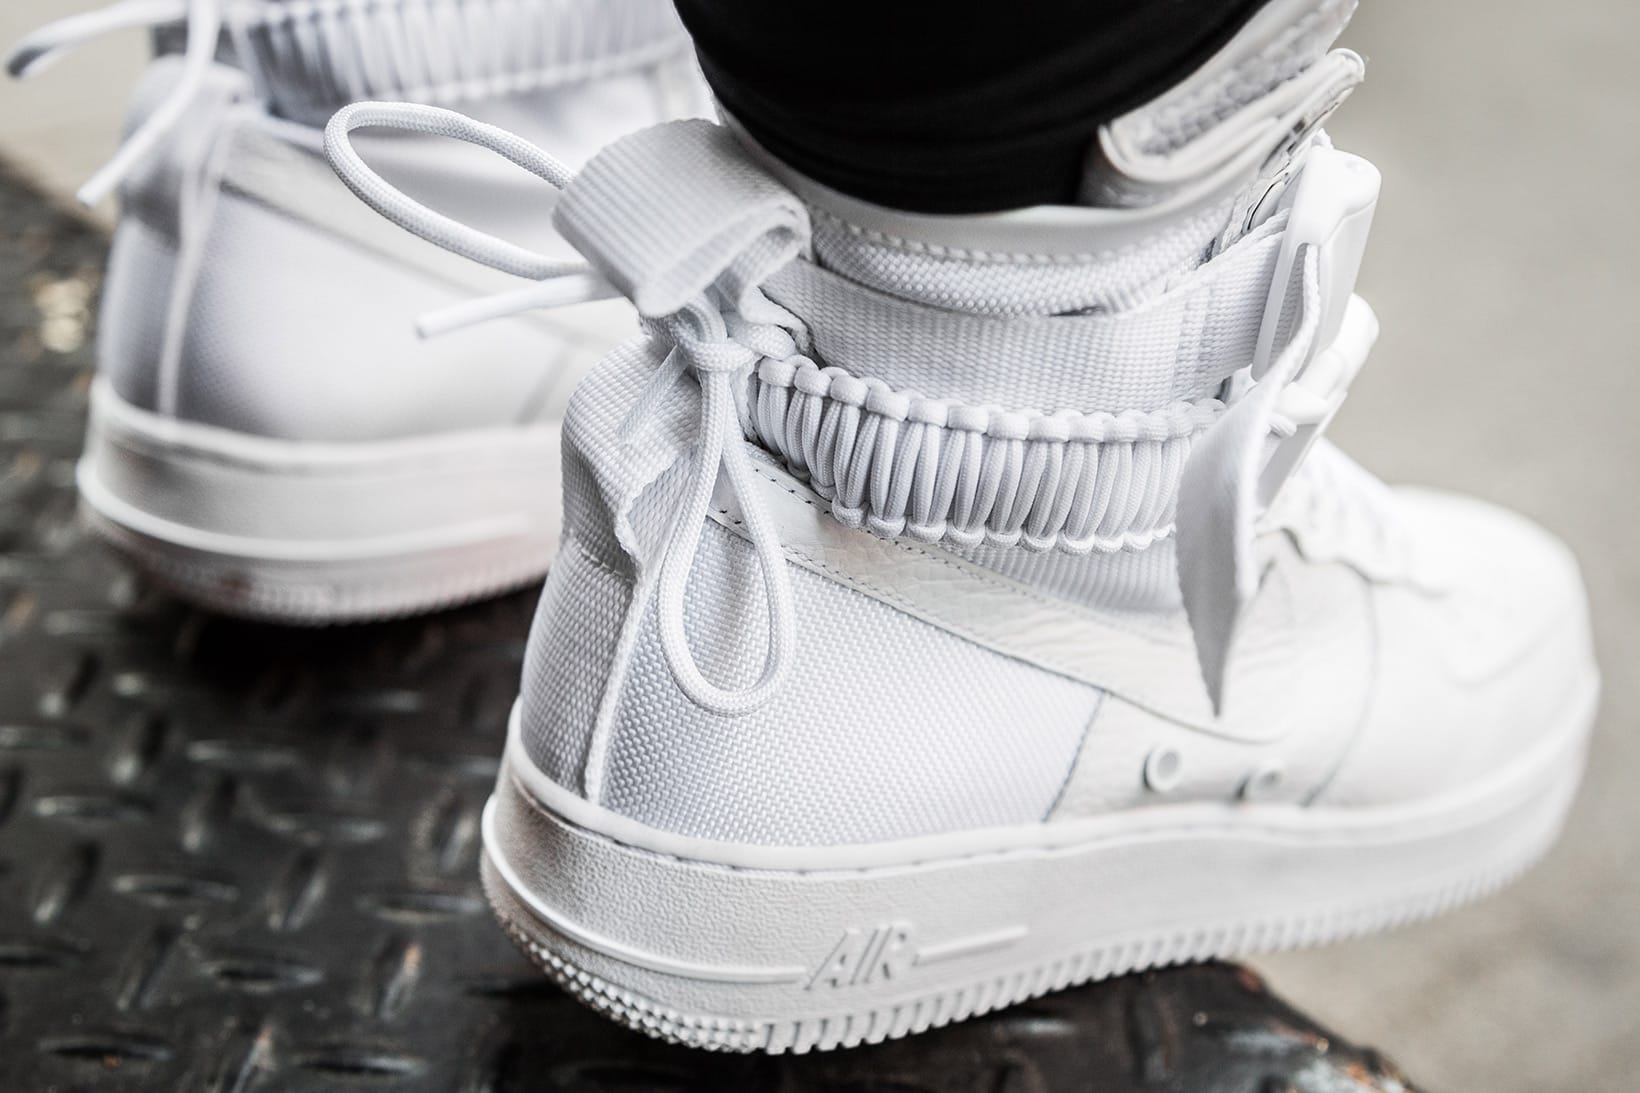 special field air force 1 white